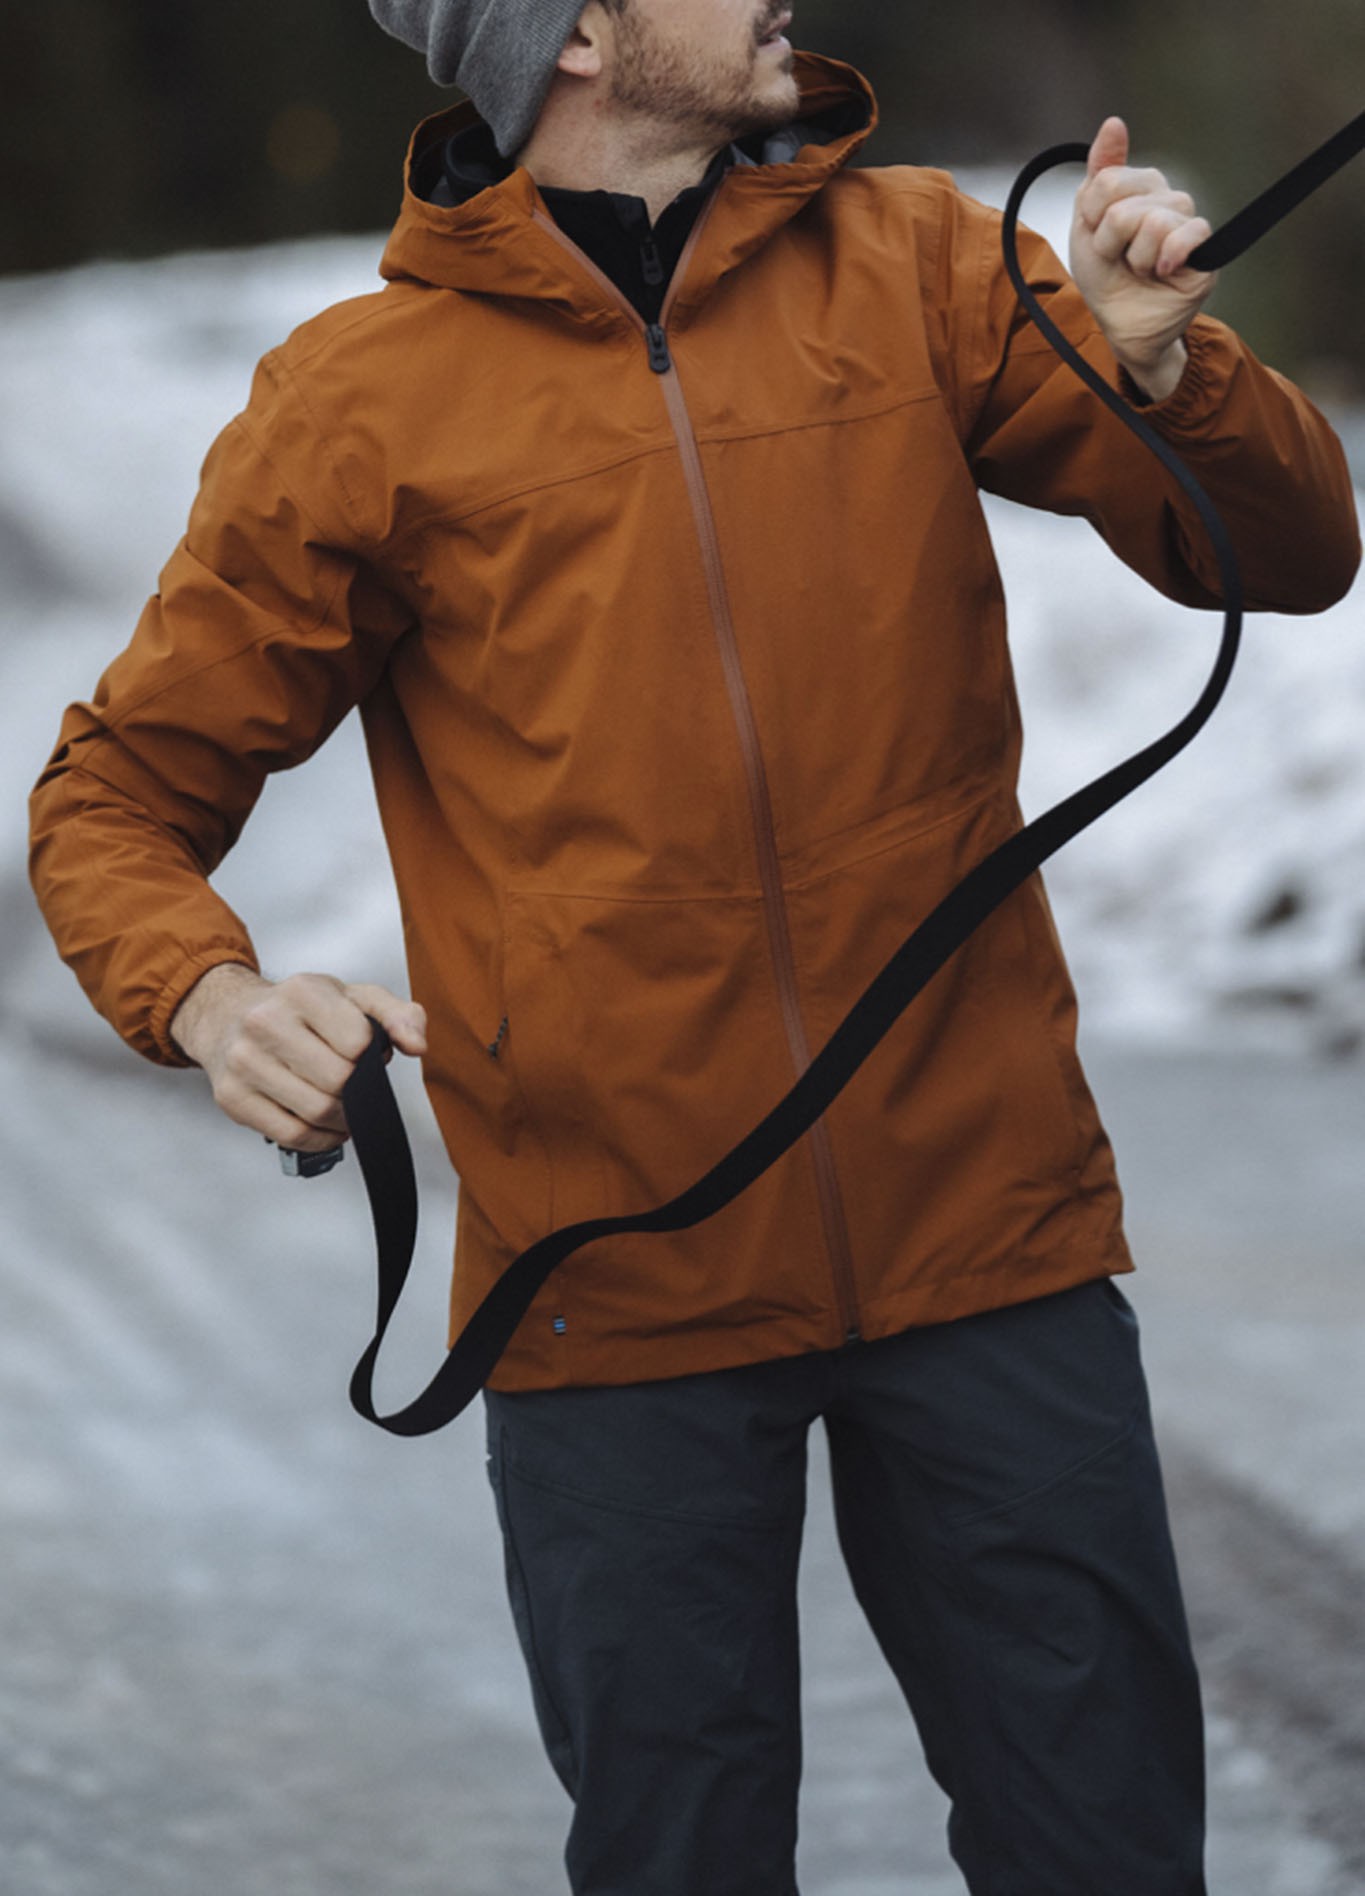 KÜhl Men’s Hiking Clothing Performance And Outdoor Wear